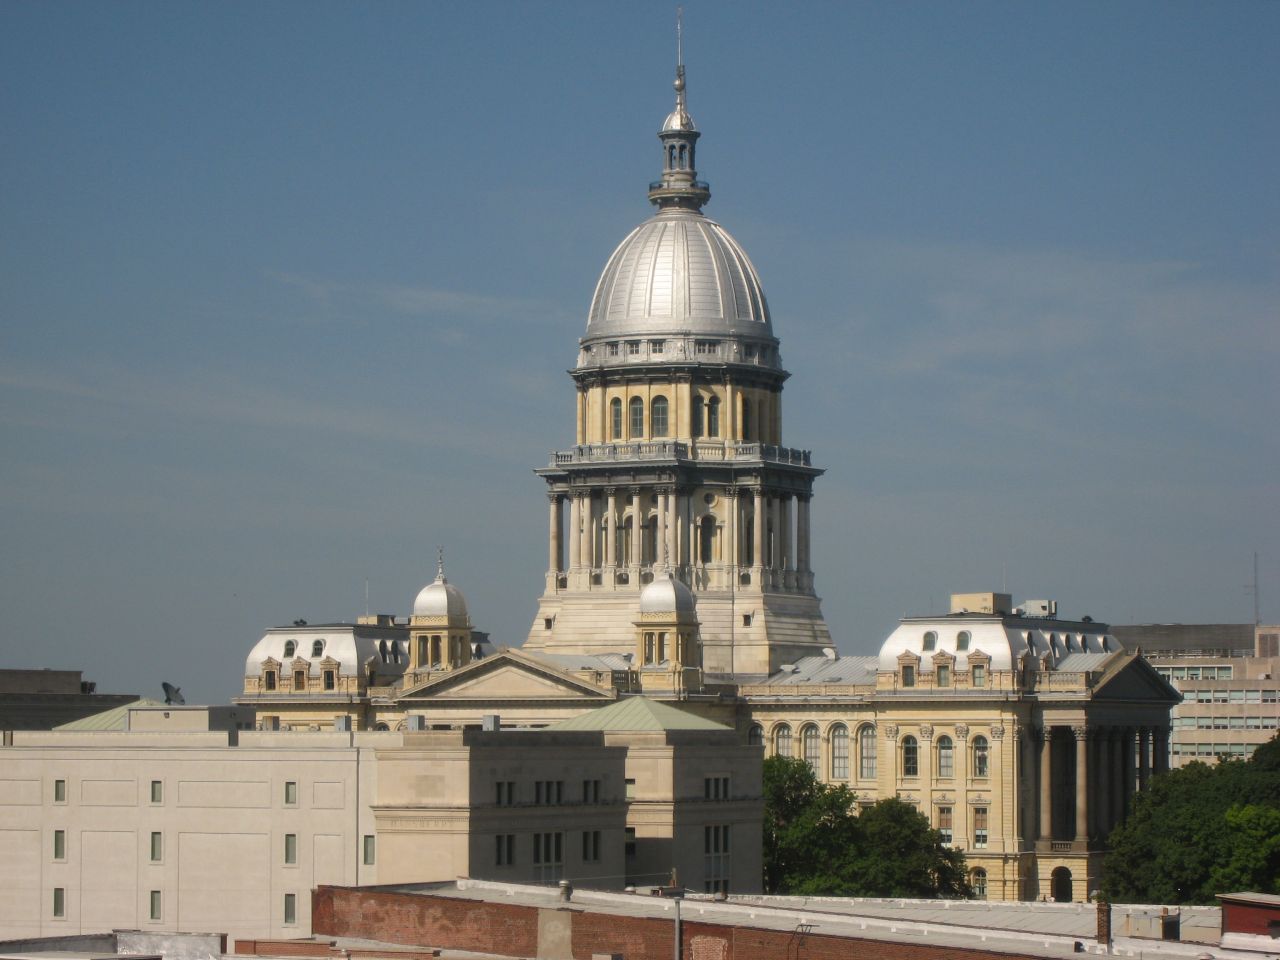 View of the State Capitol from a 6th floor office